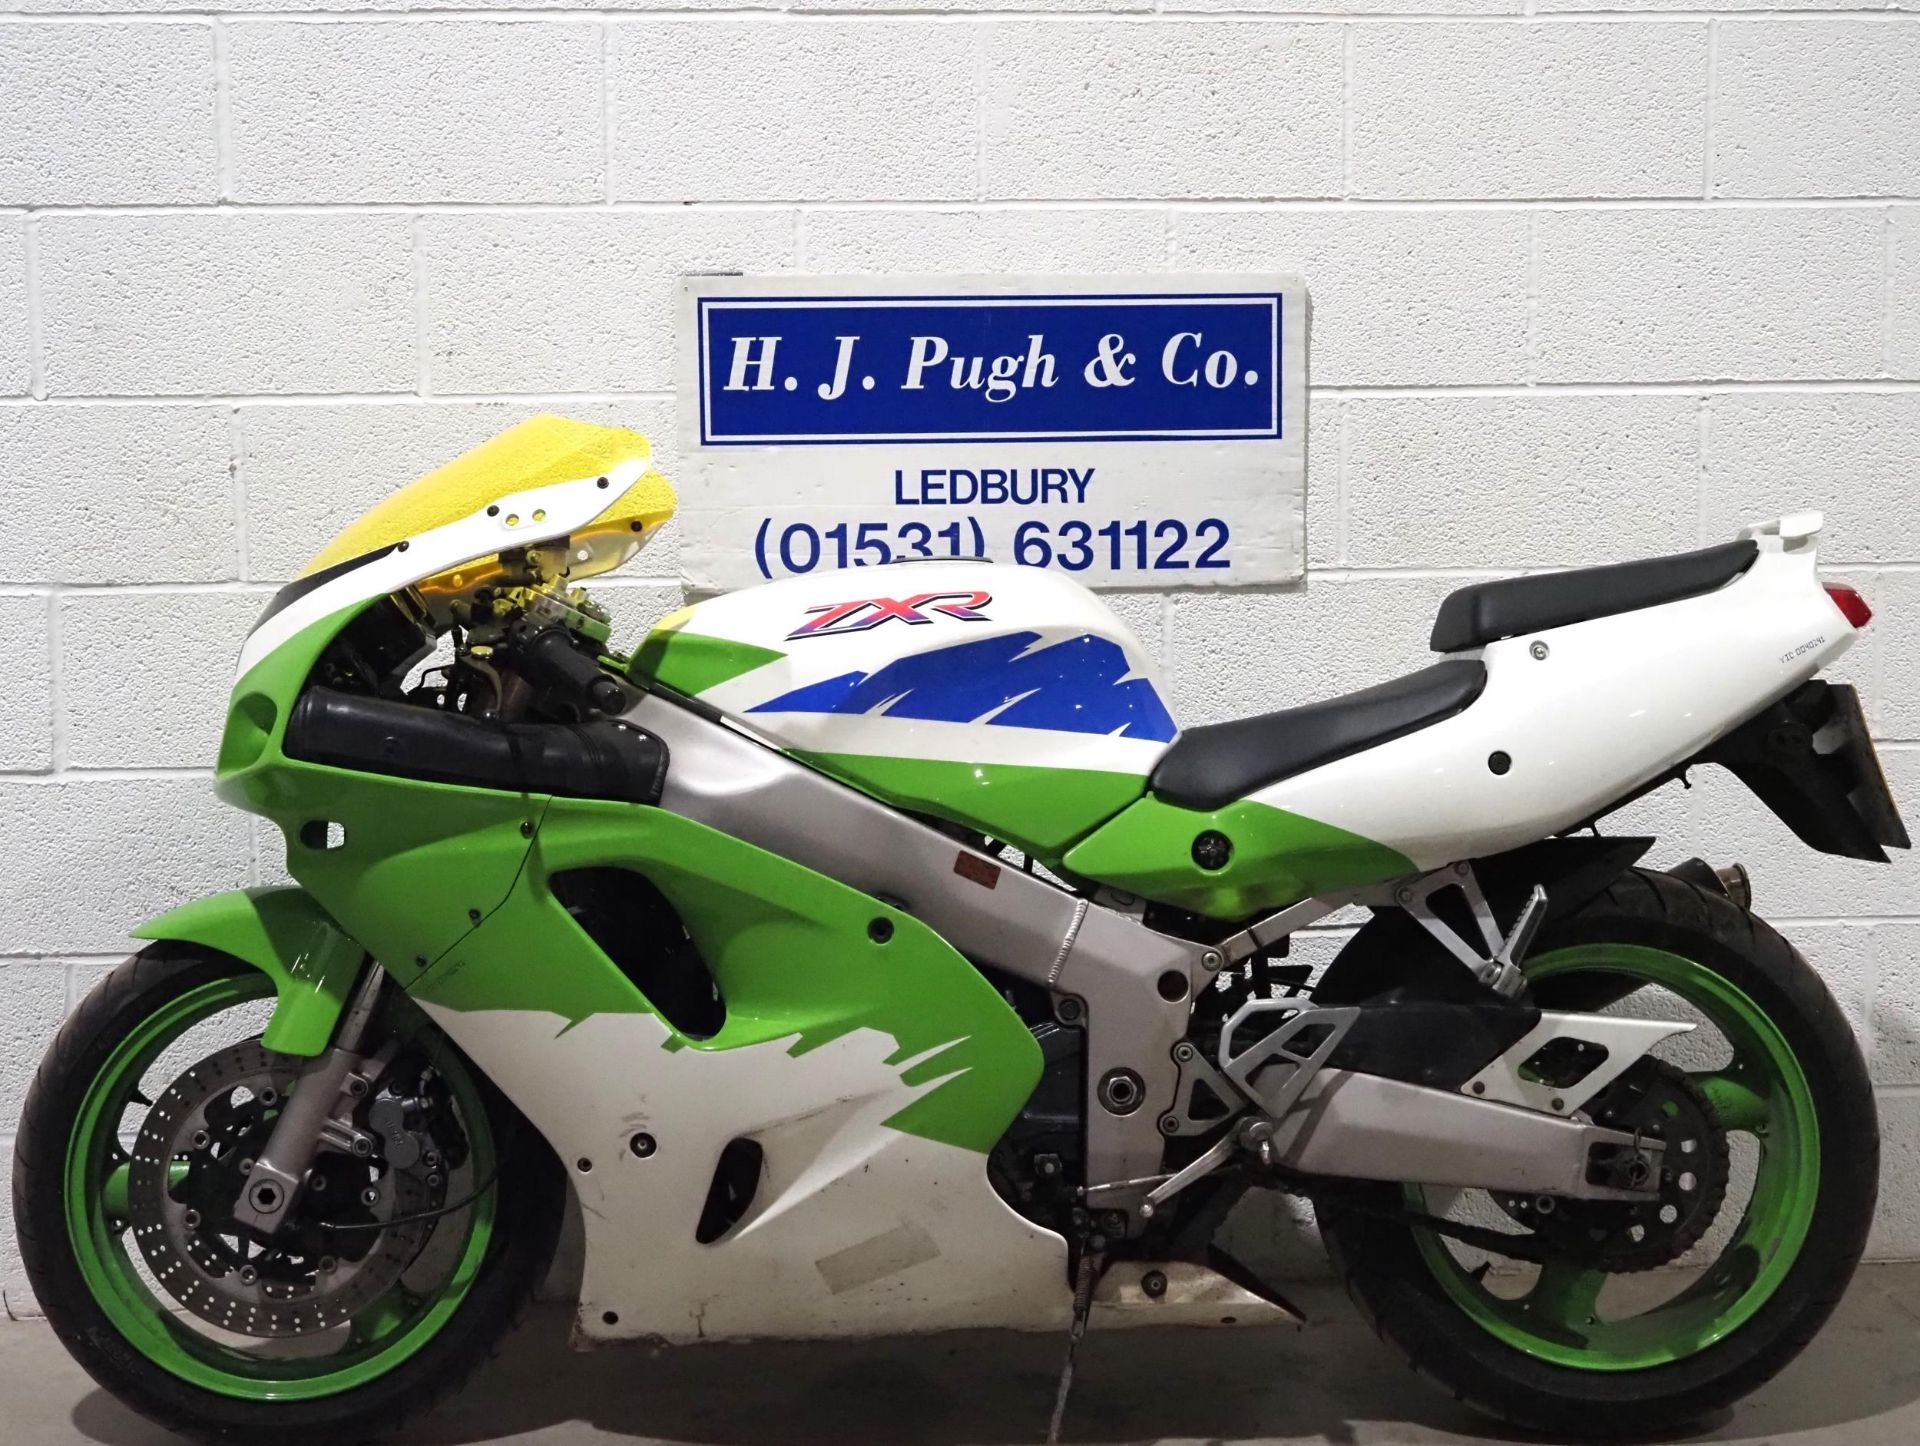 Kawasaki ZXR750 motorcycle. 1995. 749cc. Runs and rides. Fitted with carbon exhaust and stage 2 dyno - Image 6 of 6